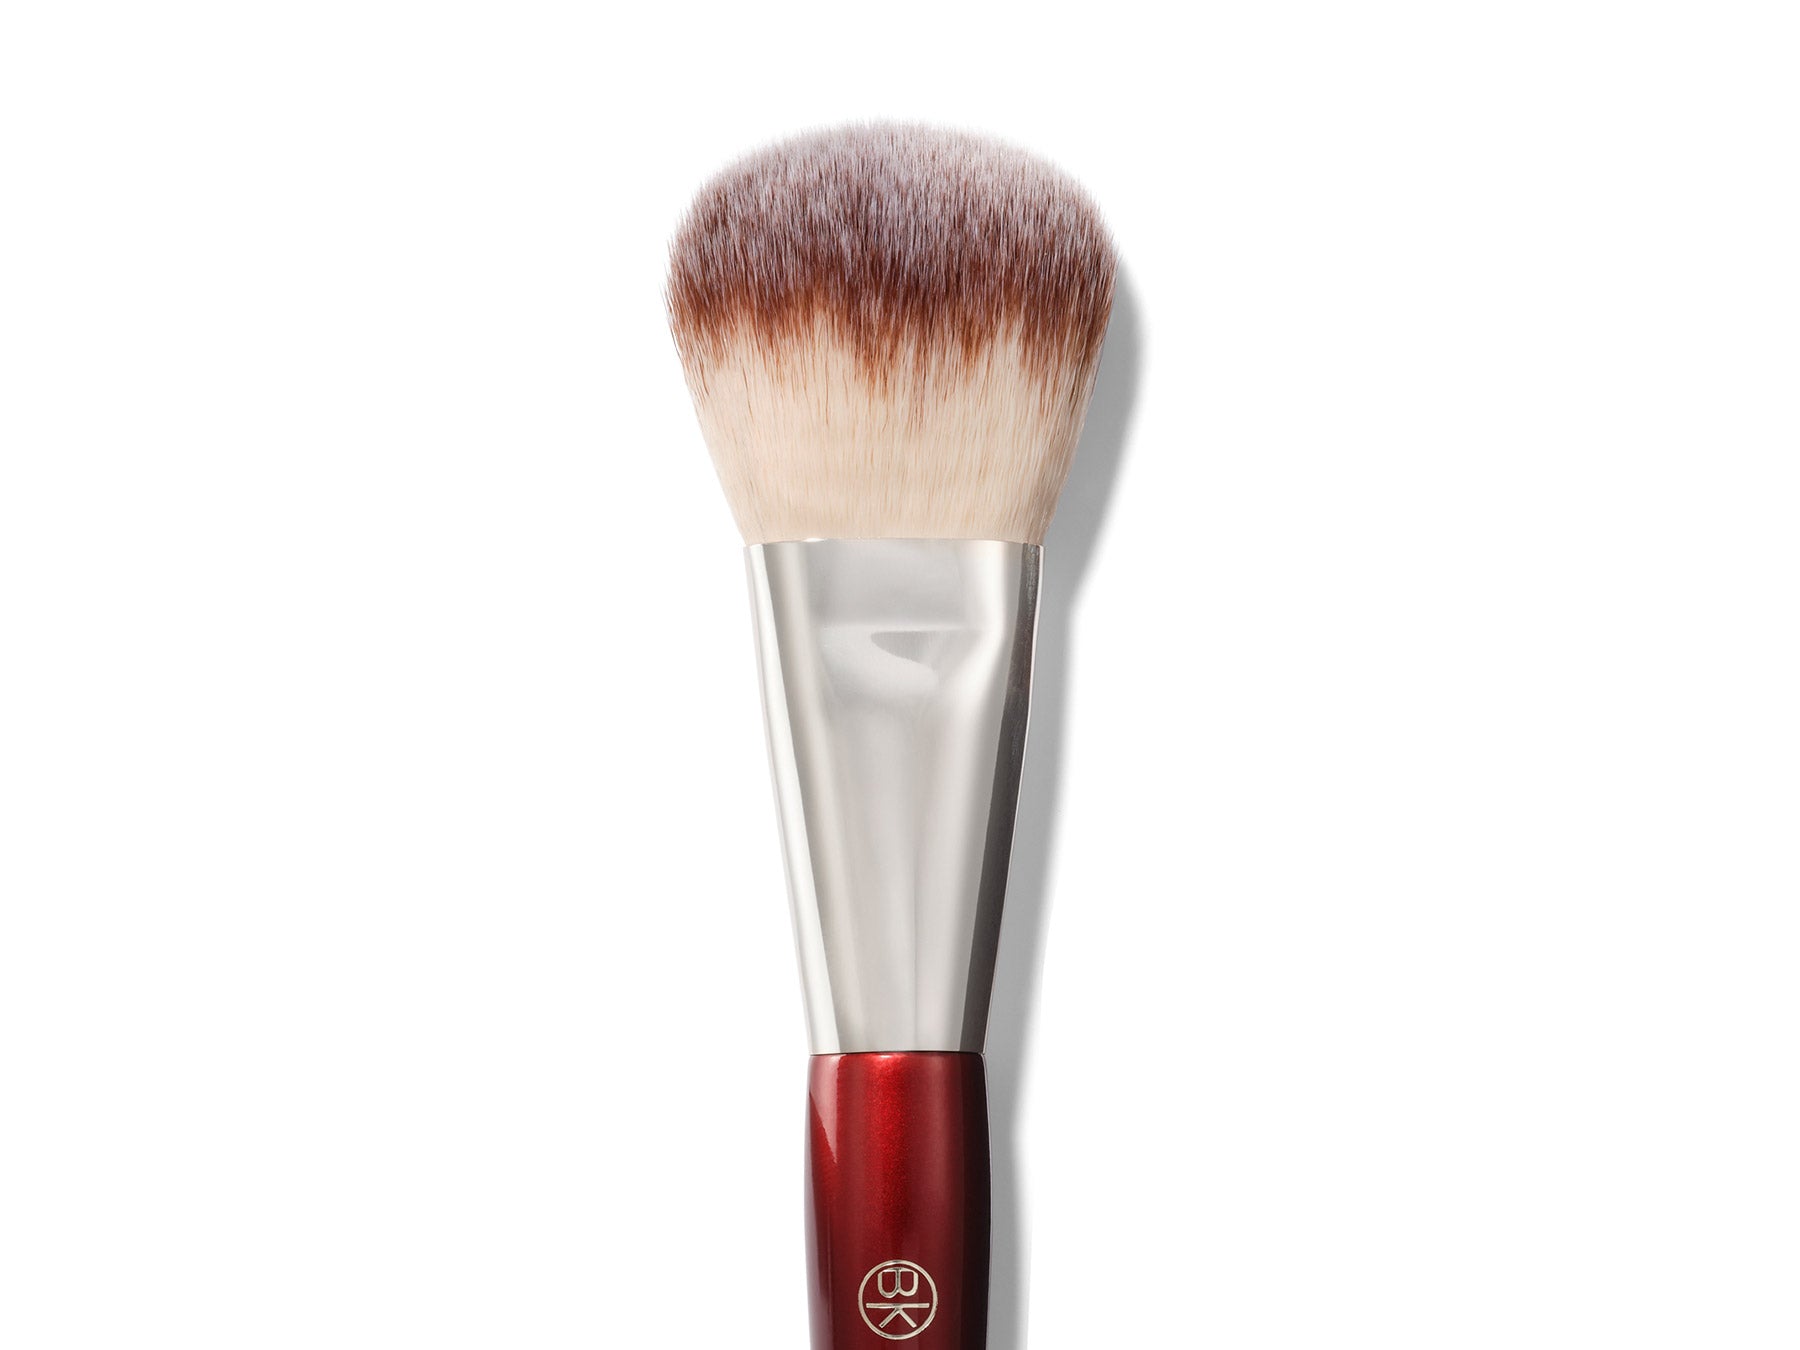 TOP BRUSHES FOR CREME BRONZERS